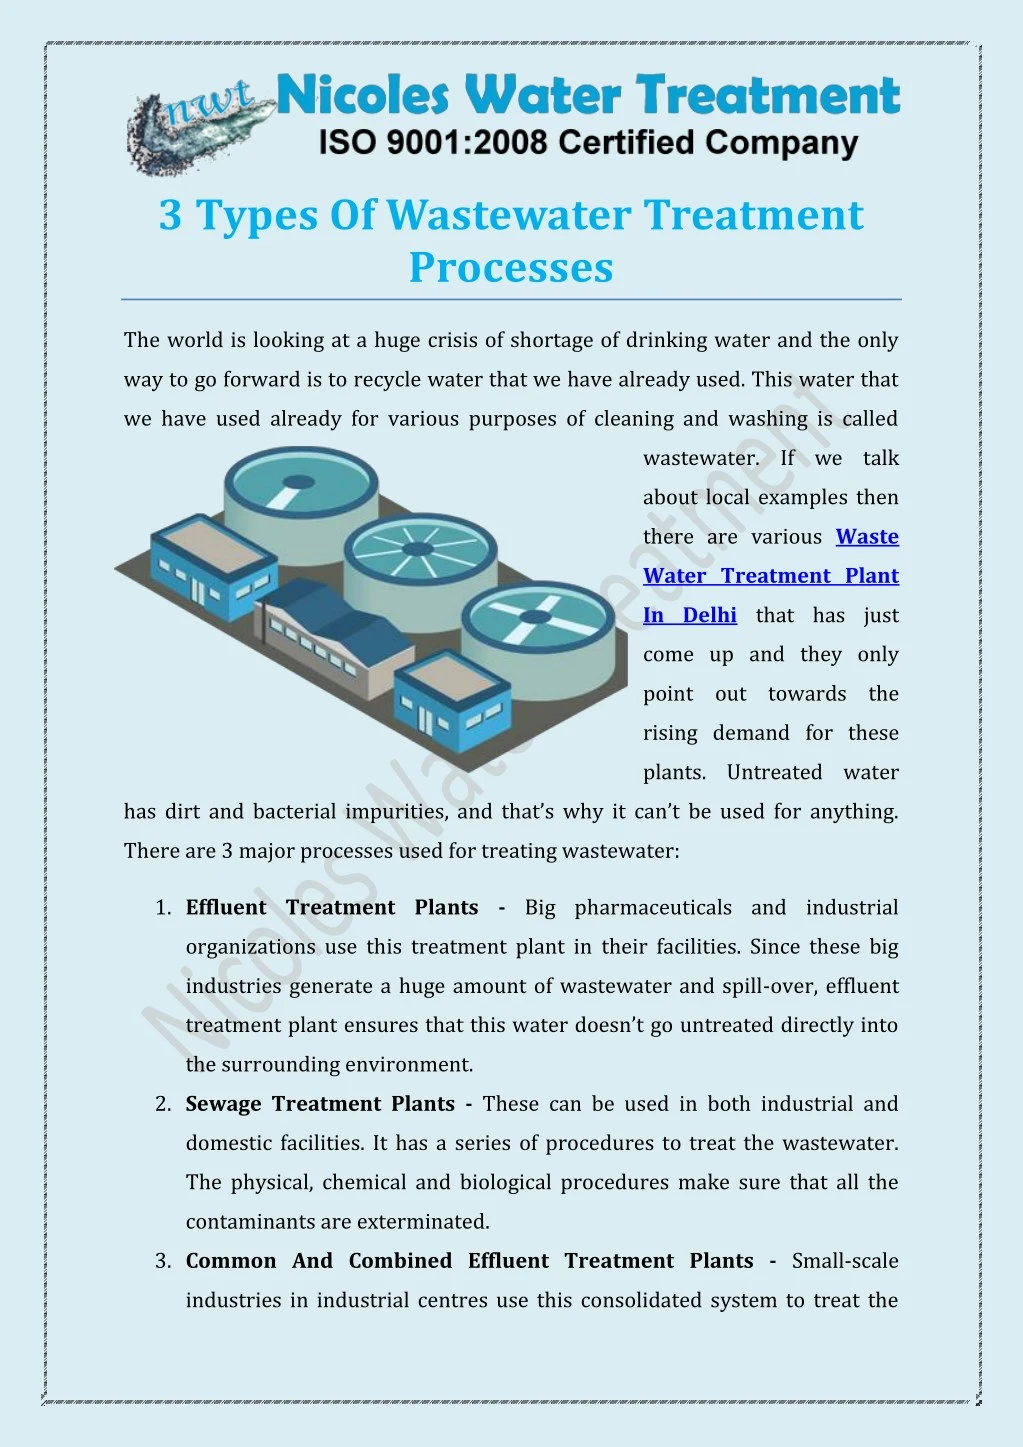 3 types of wastewater treatment processes